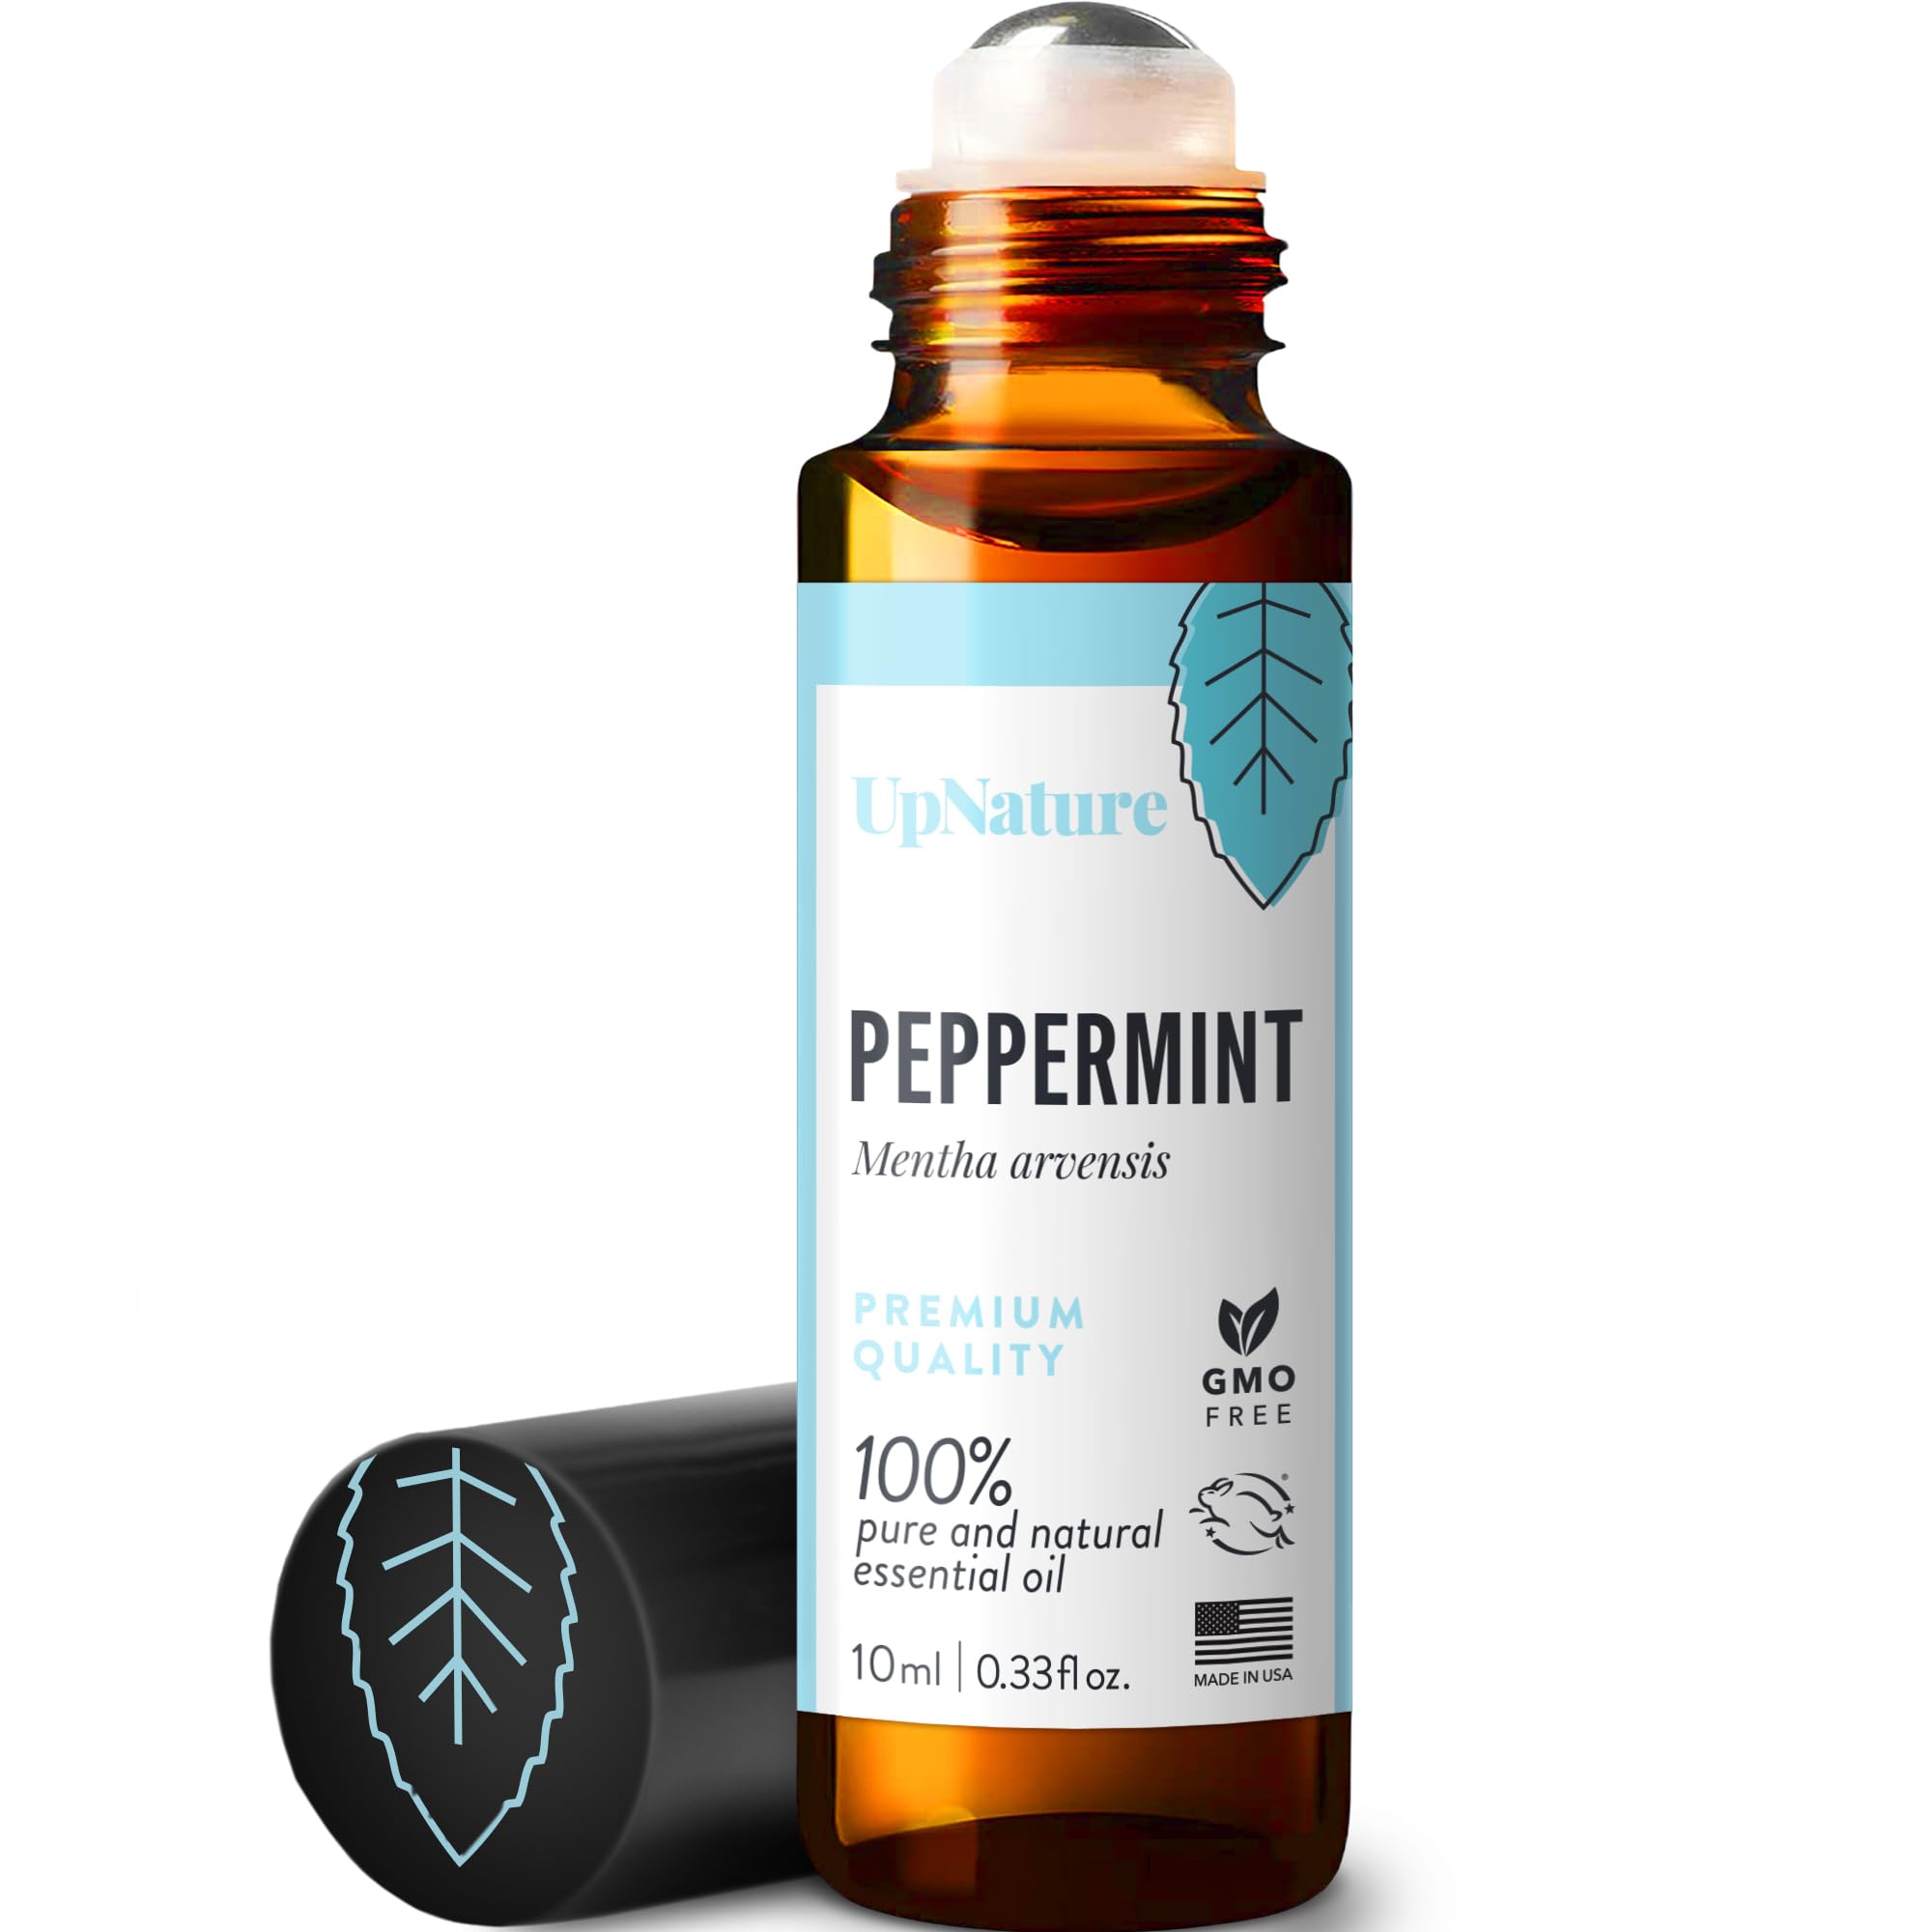 Peppermint Essential Oil Roll On - Topical Peppermint Oil - Relieves Head Tension, Pregnancy Essentials, Reduces Stress and Soothes Aches- Premium Quality, Therapeutic Grade Aromatherapy Oil